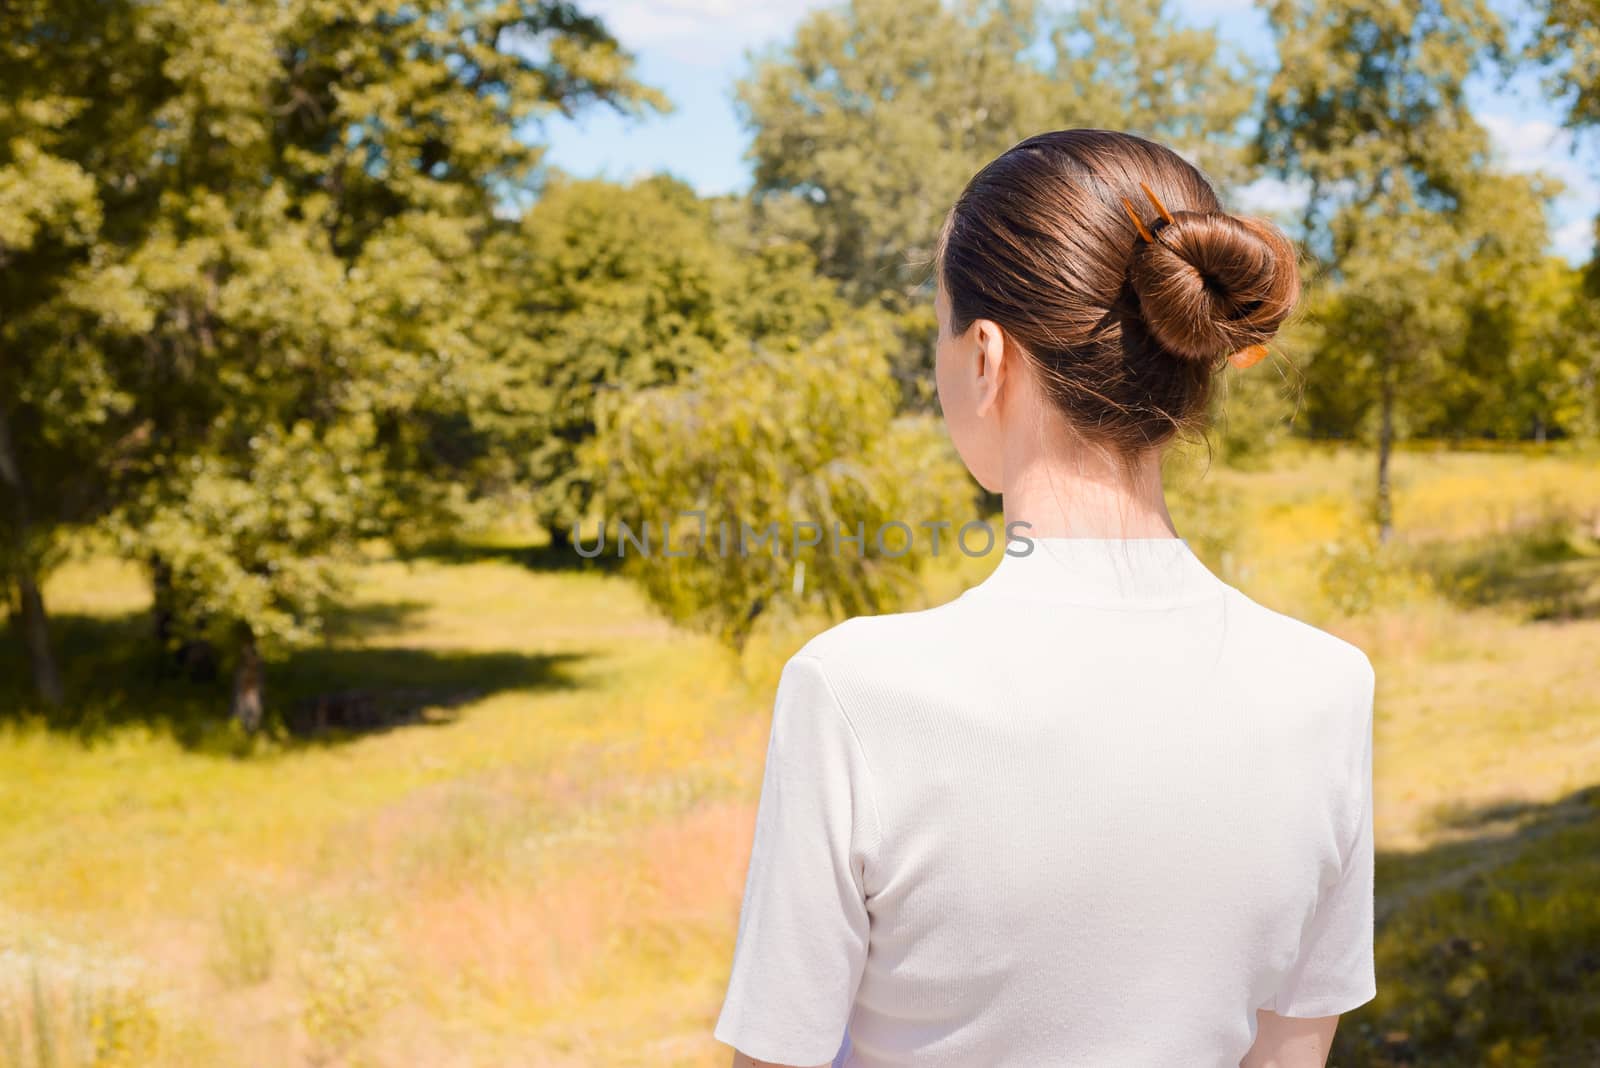 A senior woman with a bun is looking the trees in the park during a warm and sunny summer day